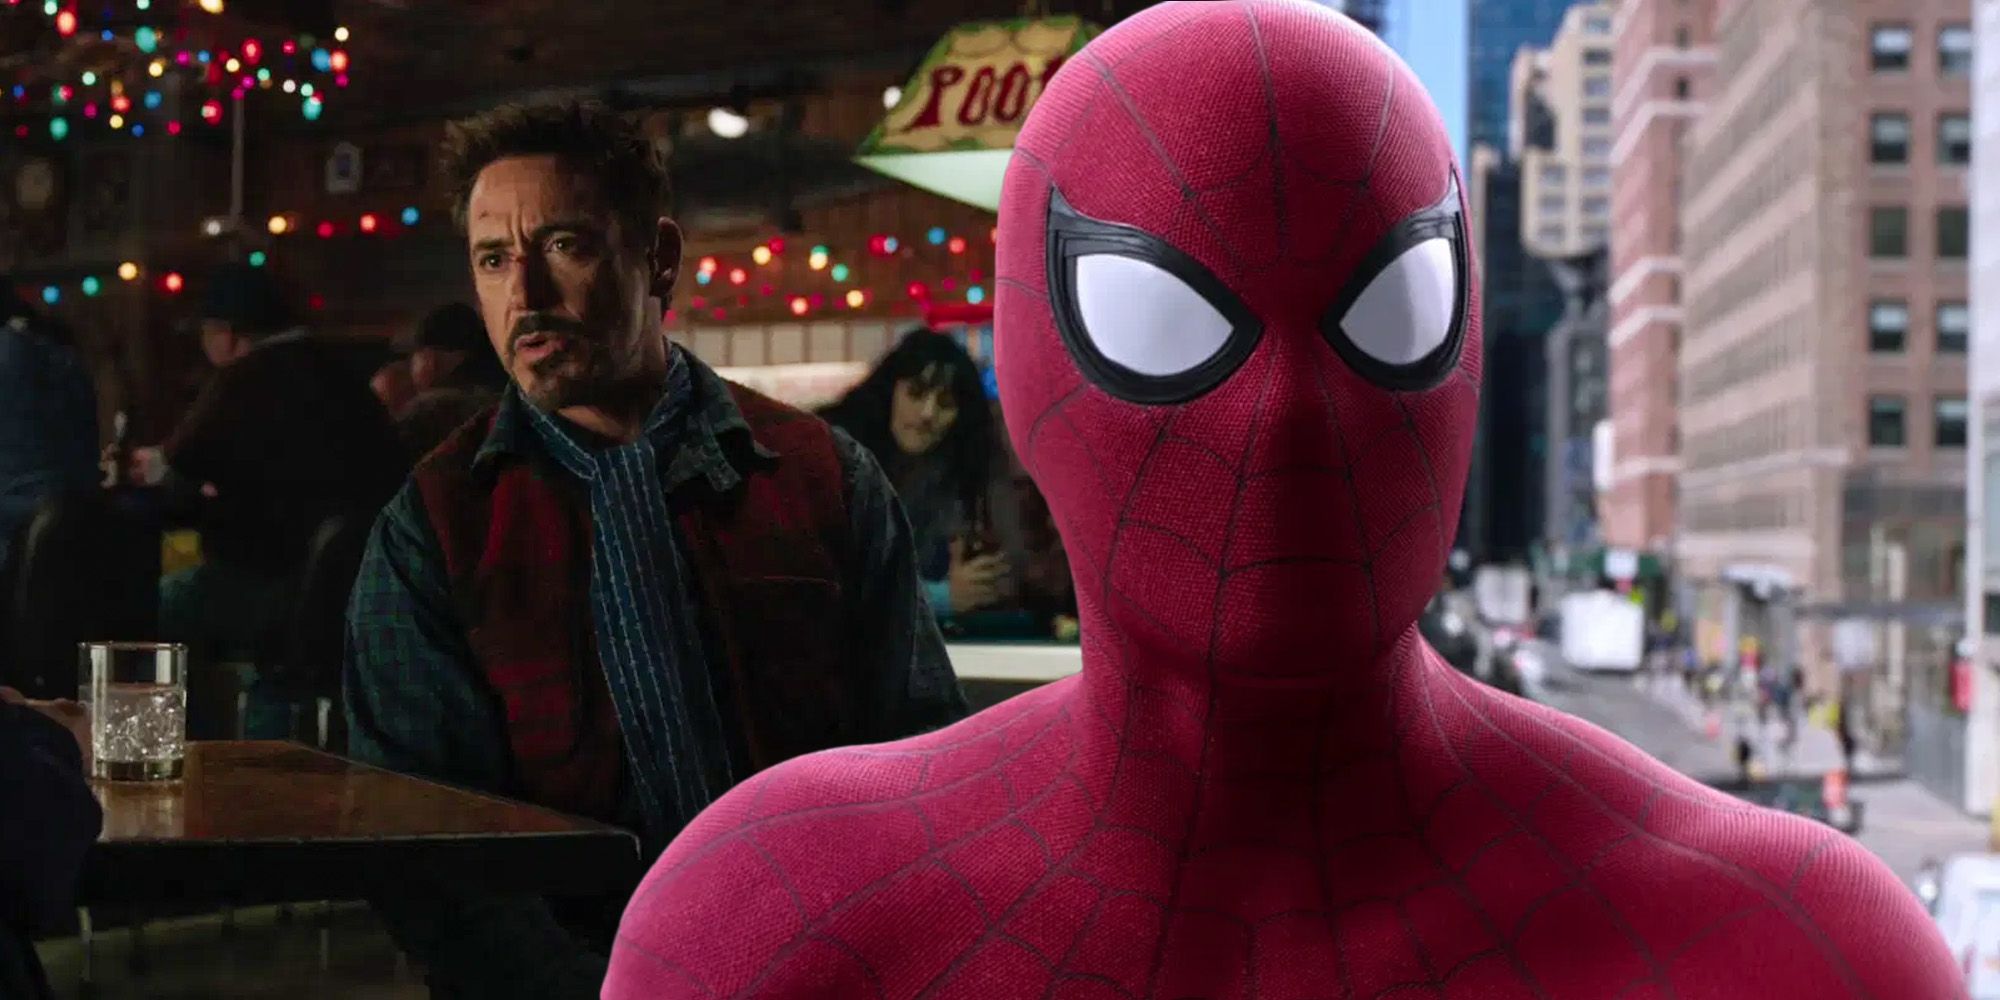 MCU SpiderMan 3’s Christmas Setting Means It’s Still Copying Iron Man